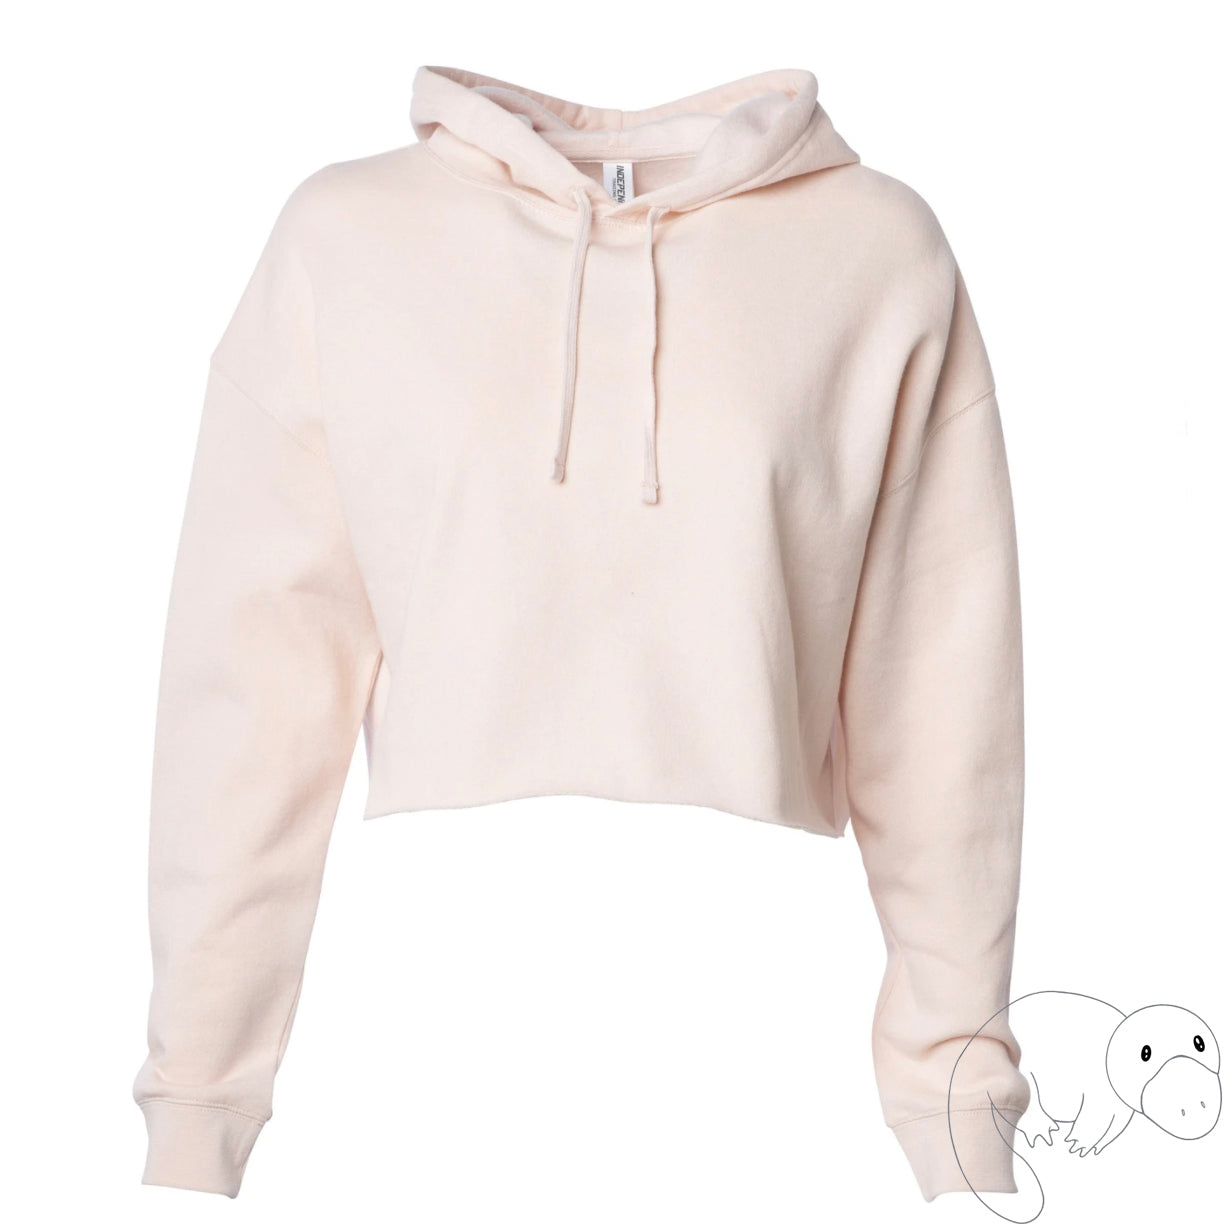 off-white-cream-bone-banana-hooded-sweatshirt-blank-crop-light-soft-hoodie-face-mask-facemaskhoodie-Plats-Hoodie-facemask-all-in-one-2-earlooops-convertible-hoodiefacemask-platinum-platypus-new-product